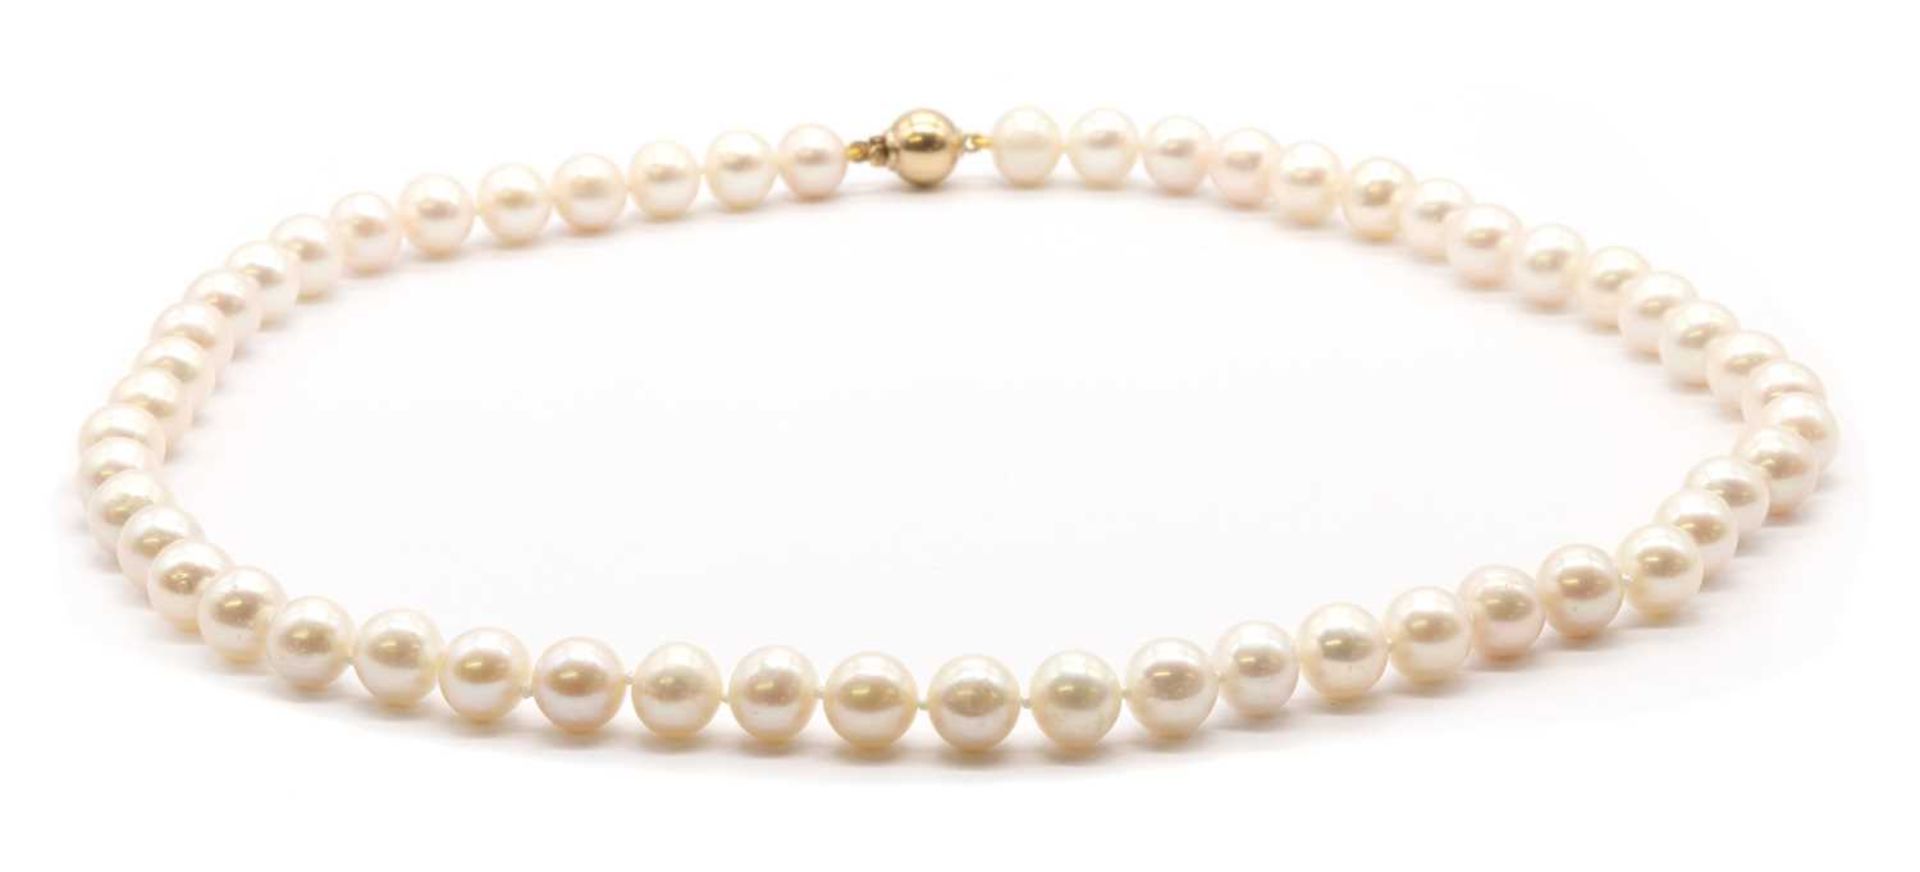 A single row uniform freshwater cultured pearl necklace,